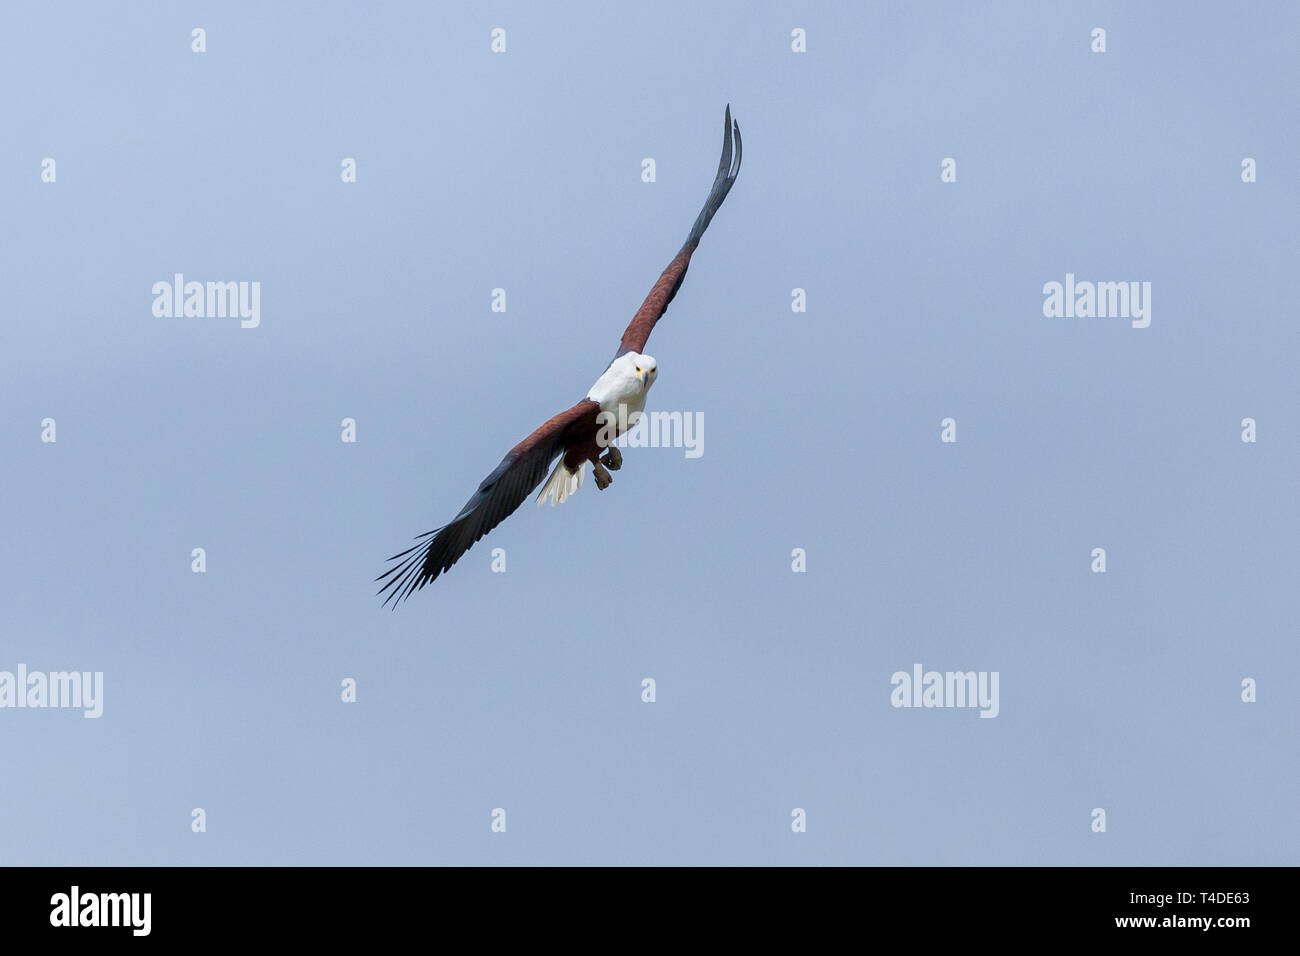 An african fish eagle flying high over a small waterhole fishing for catfish, landscape format, Ol Pejeta Conservancy, Laikipia, Kenya, Africa Stock Photo